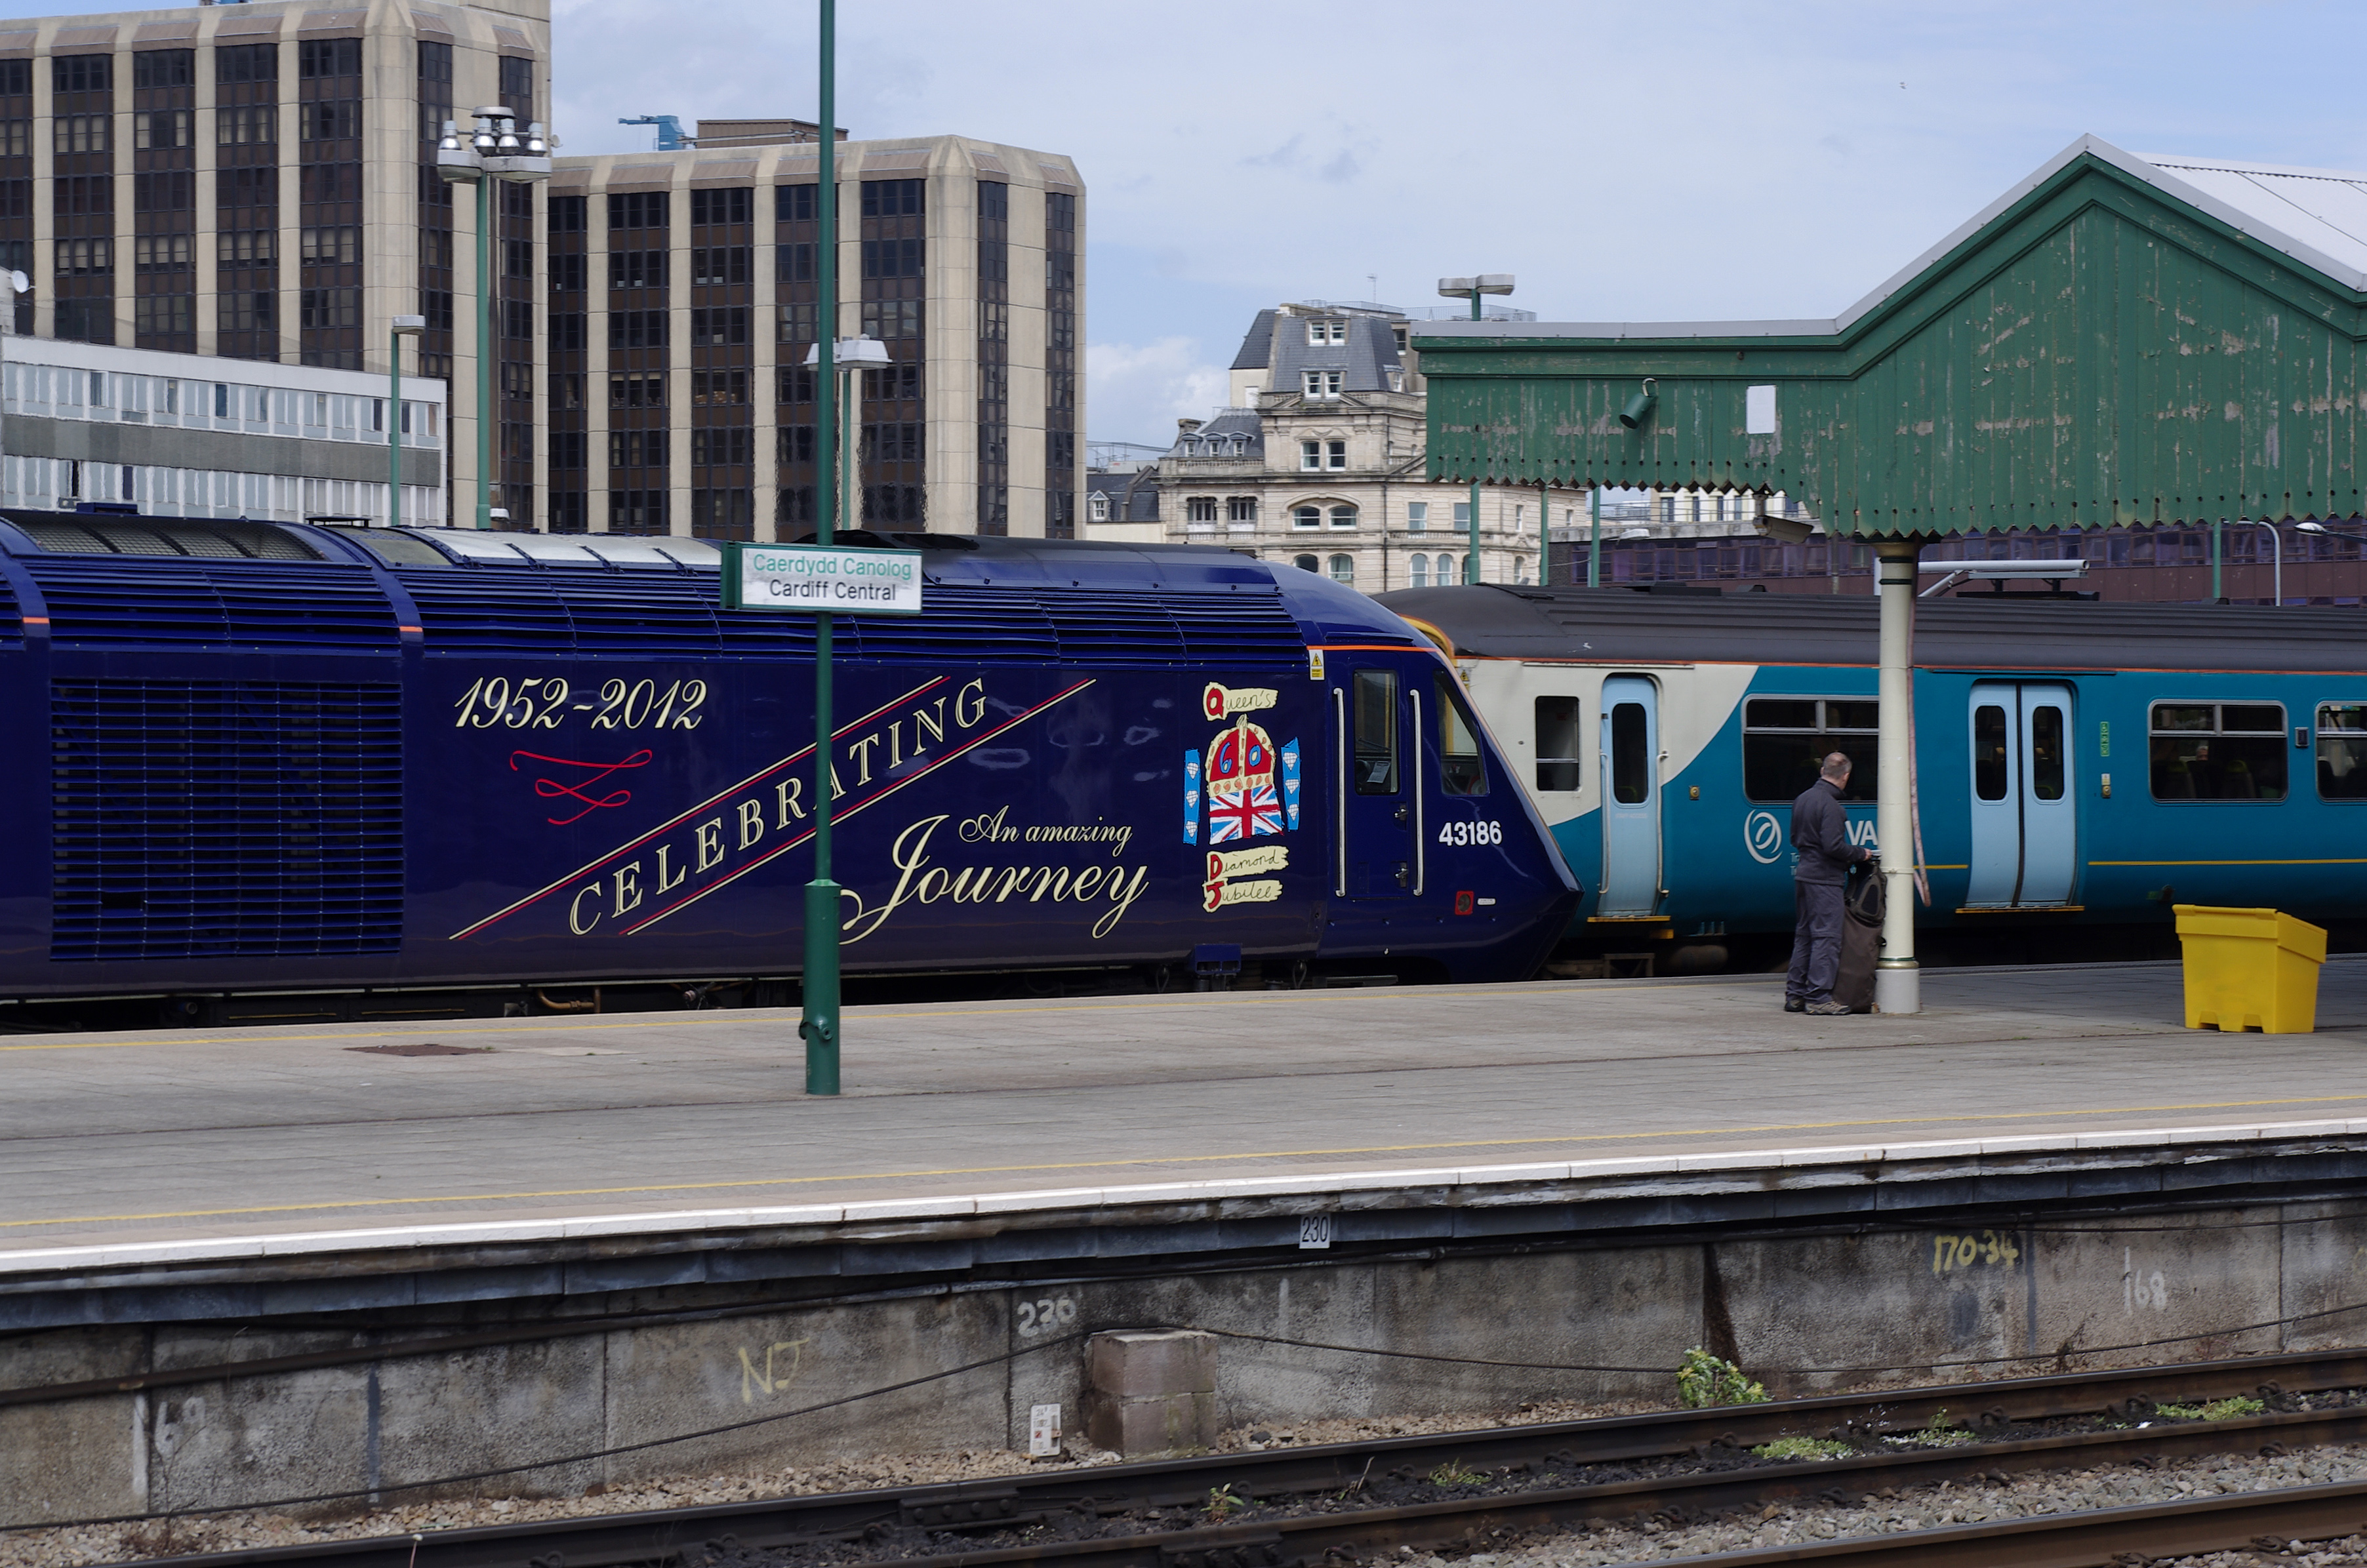 Cardiff Central railway station MMB 31 43186 150217